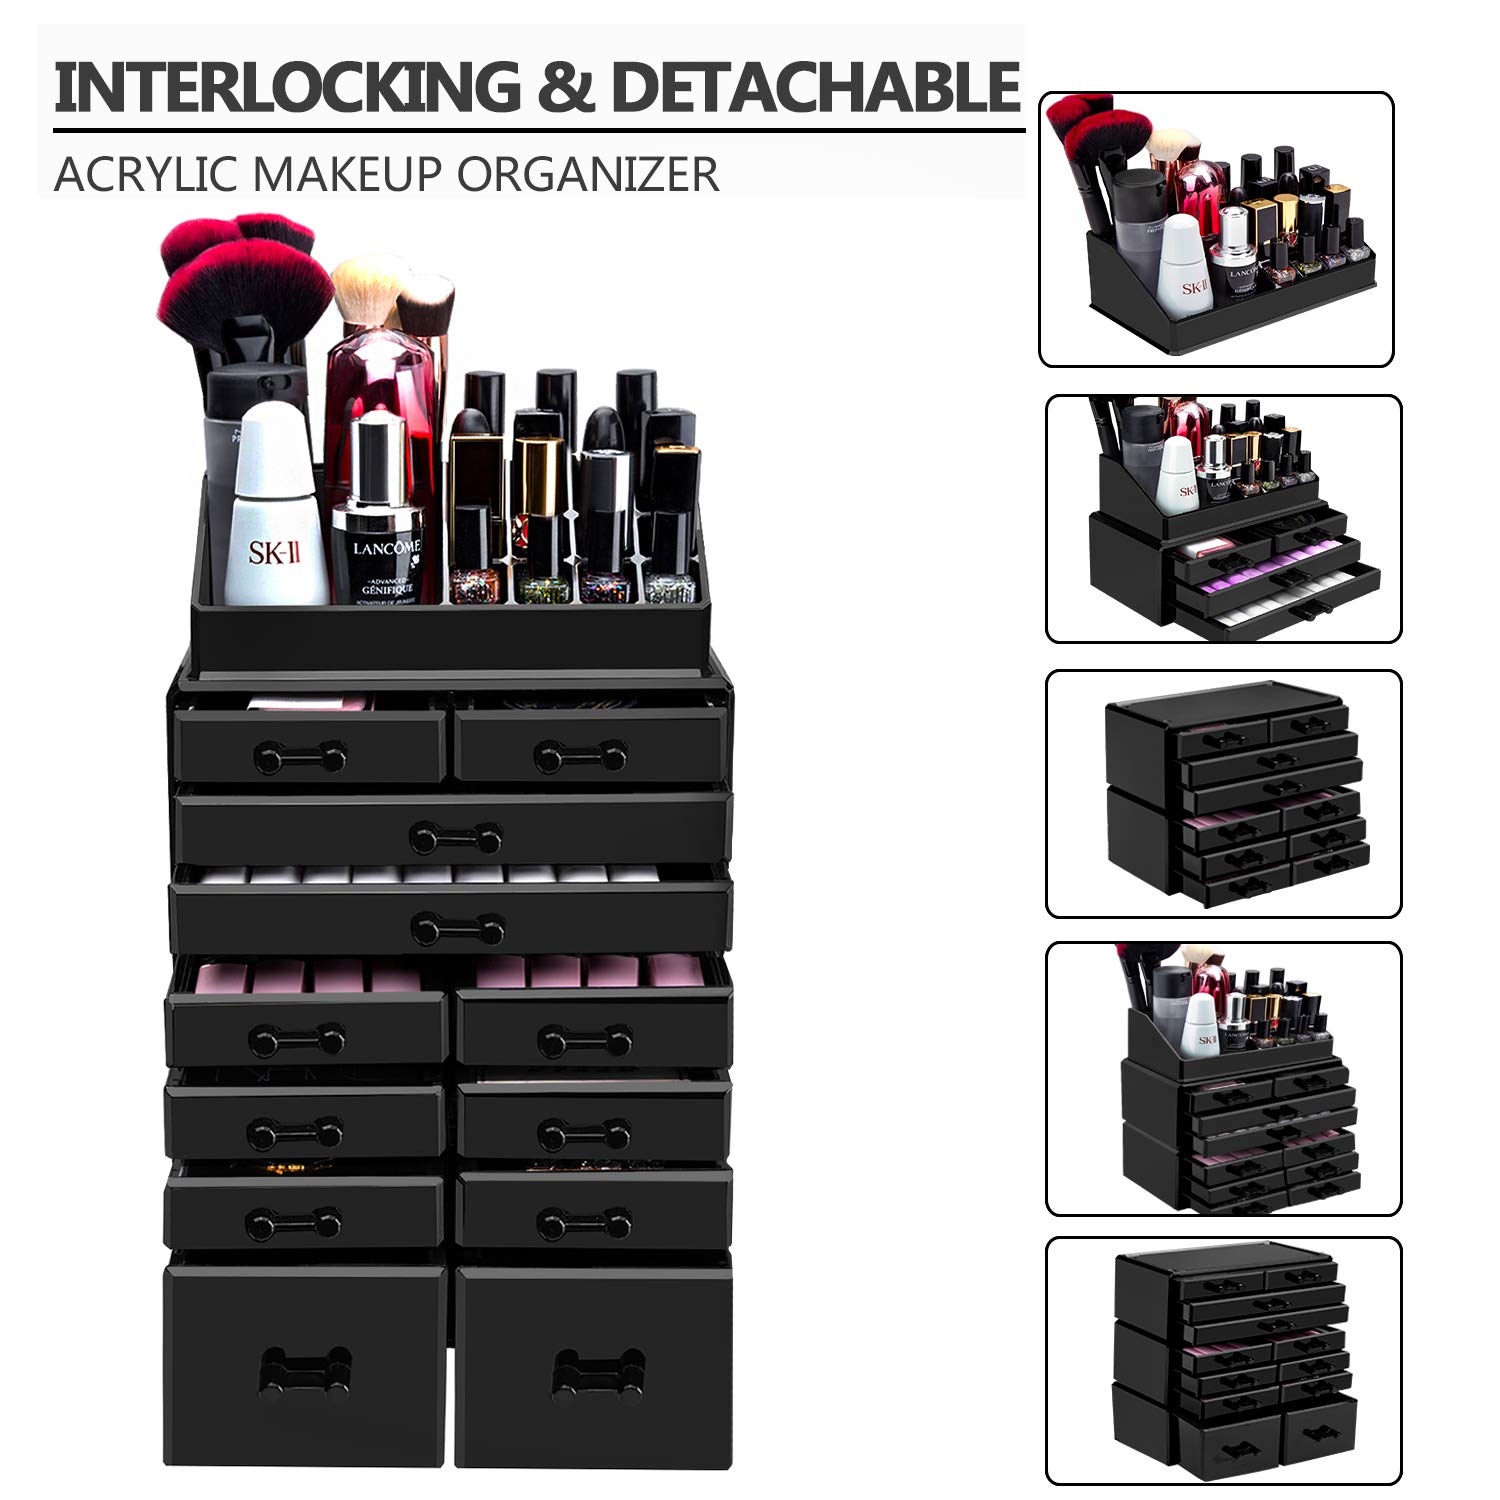 HBlife Makeup Organizer Acrylic Cosmetic Storage Drawers and Jewelry Display Box with 12 Drawers, 9.5 x 5.4 x15.8 Inches, Black